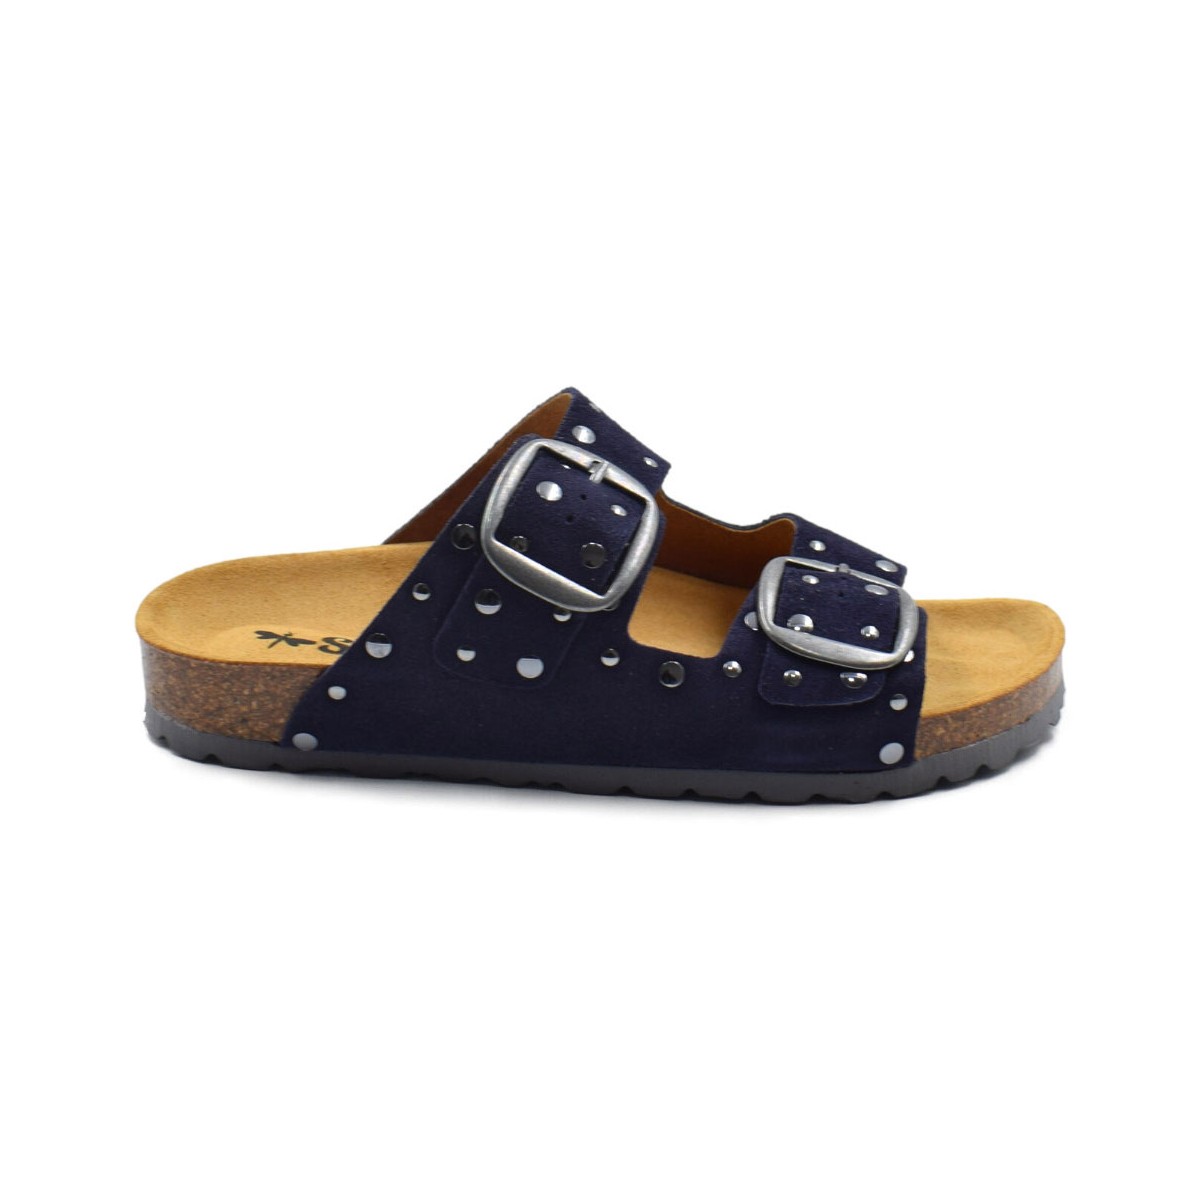 Bio flat sandals in navy leather by Biocomfort